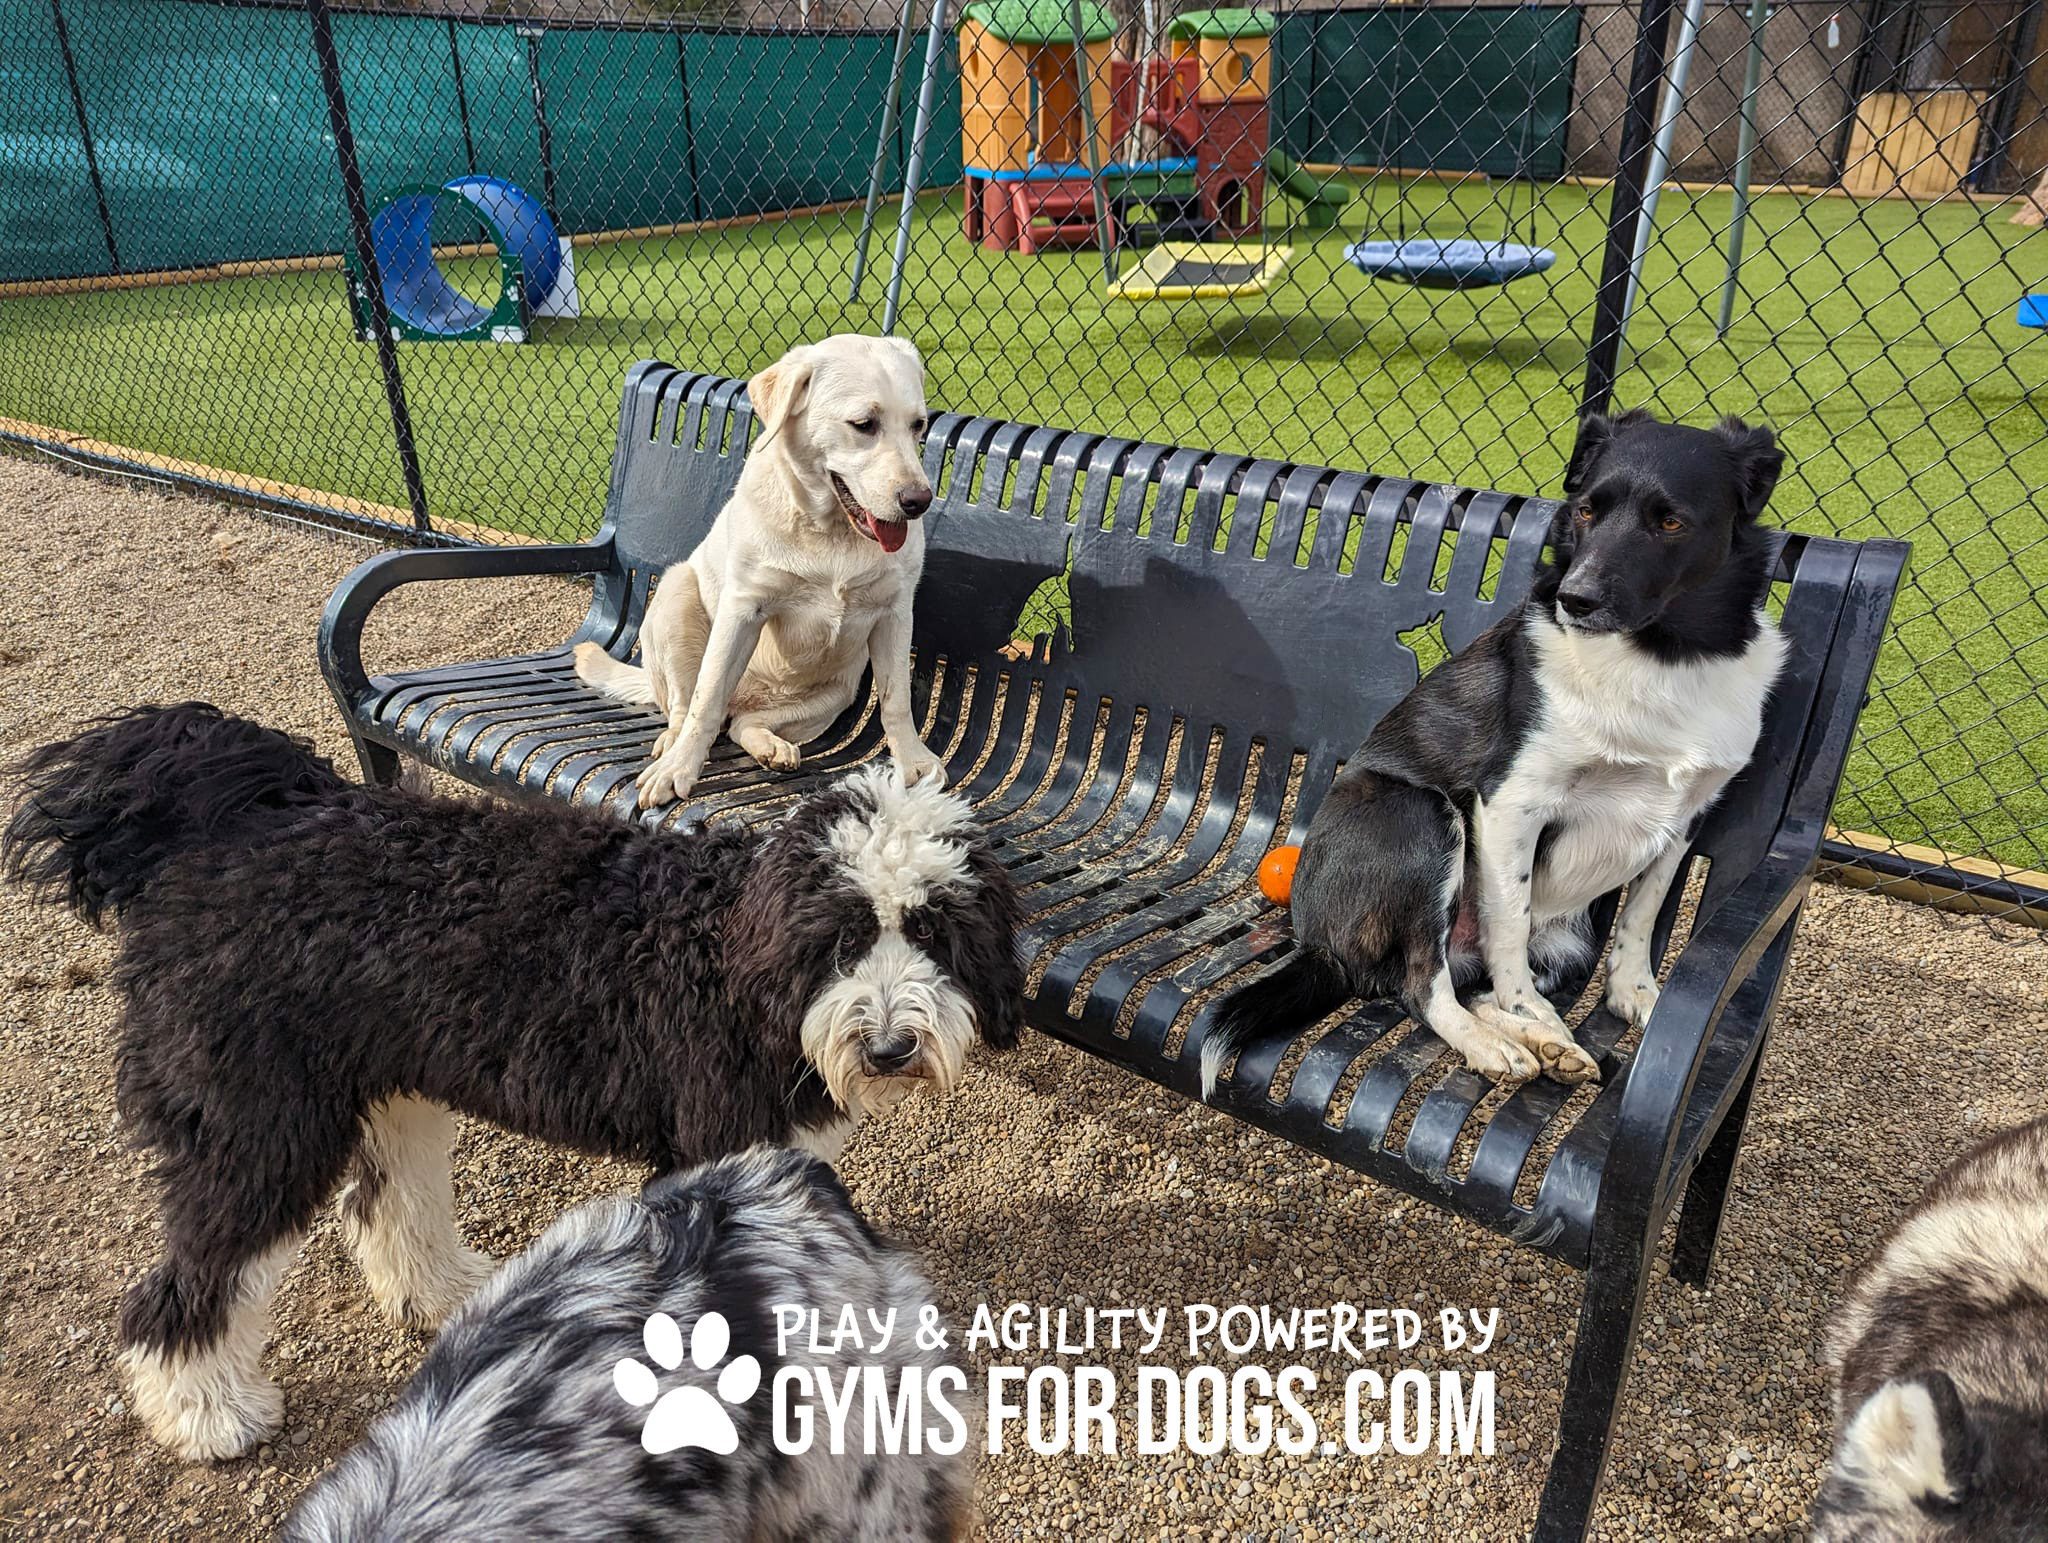 3 dog bench | Dog Park Outfitters